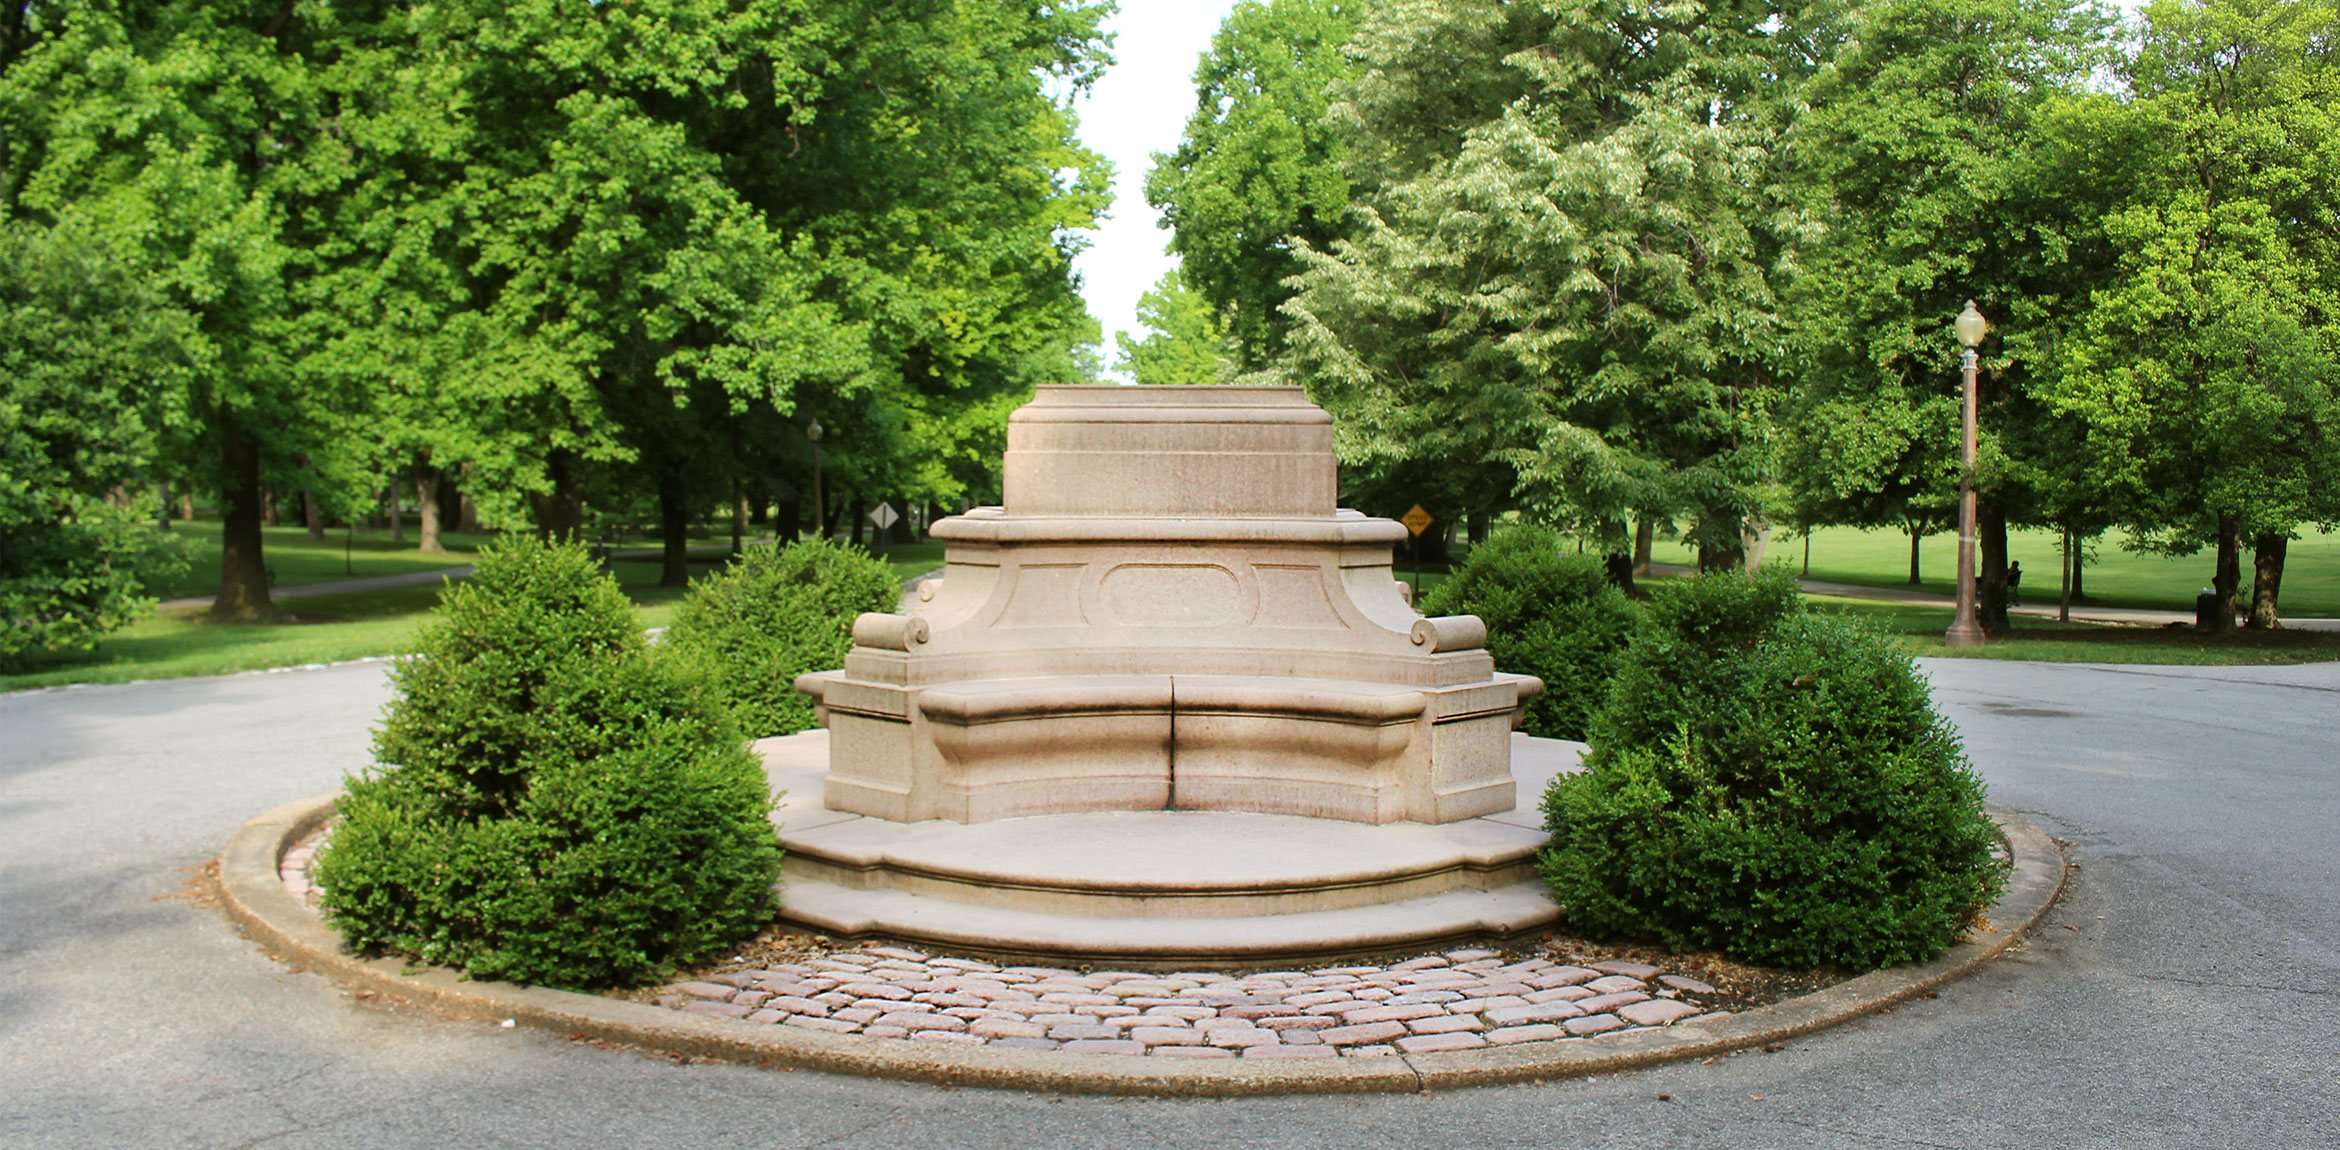 A view of the remaining base of removed Christopher Columbus statue in Tower Grove Park.